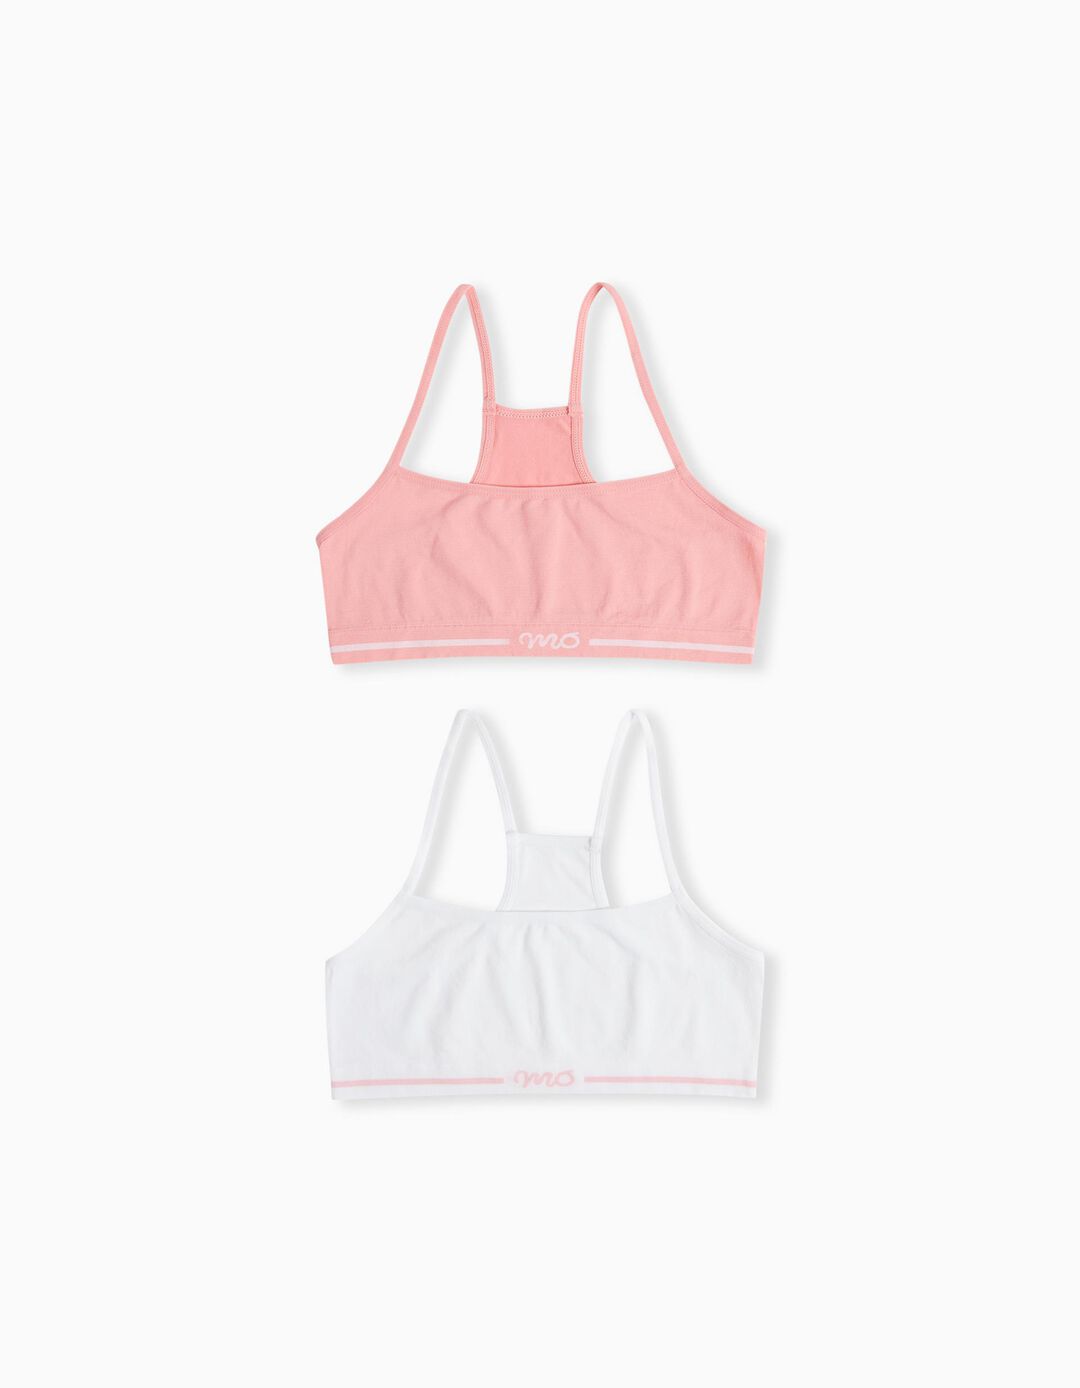 2 Tops Pack, Girls, Pink/White